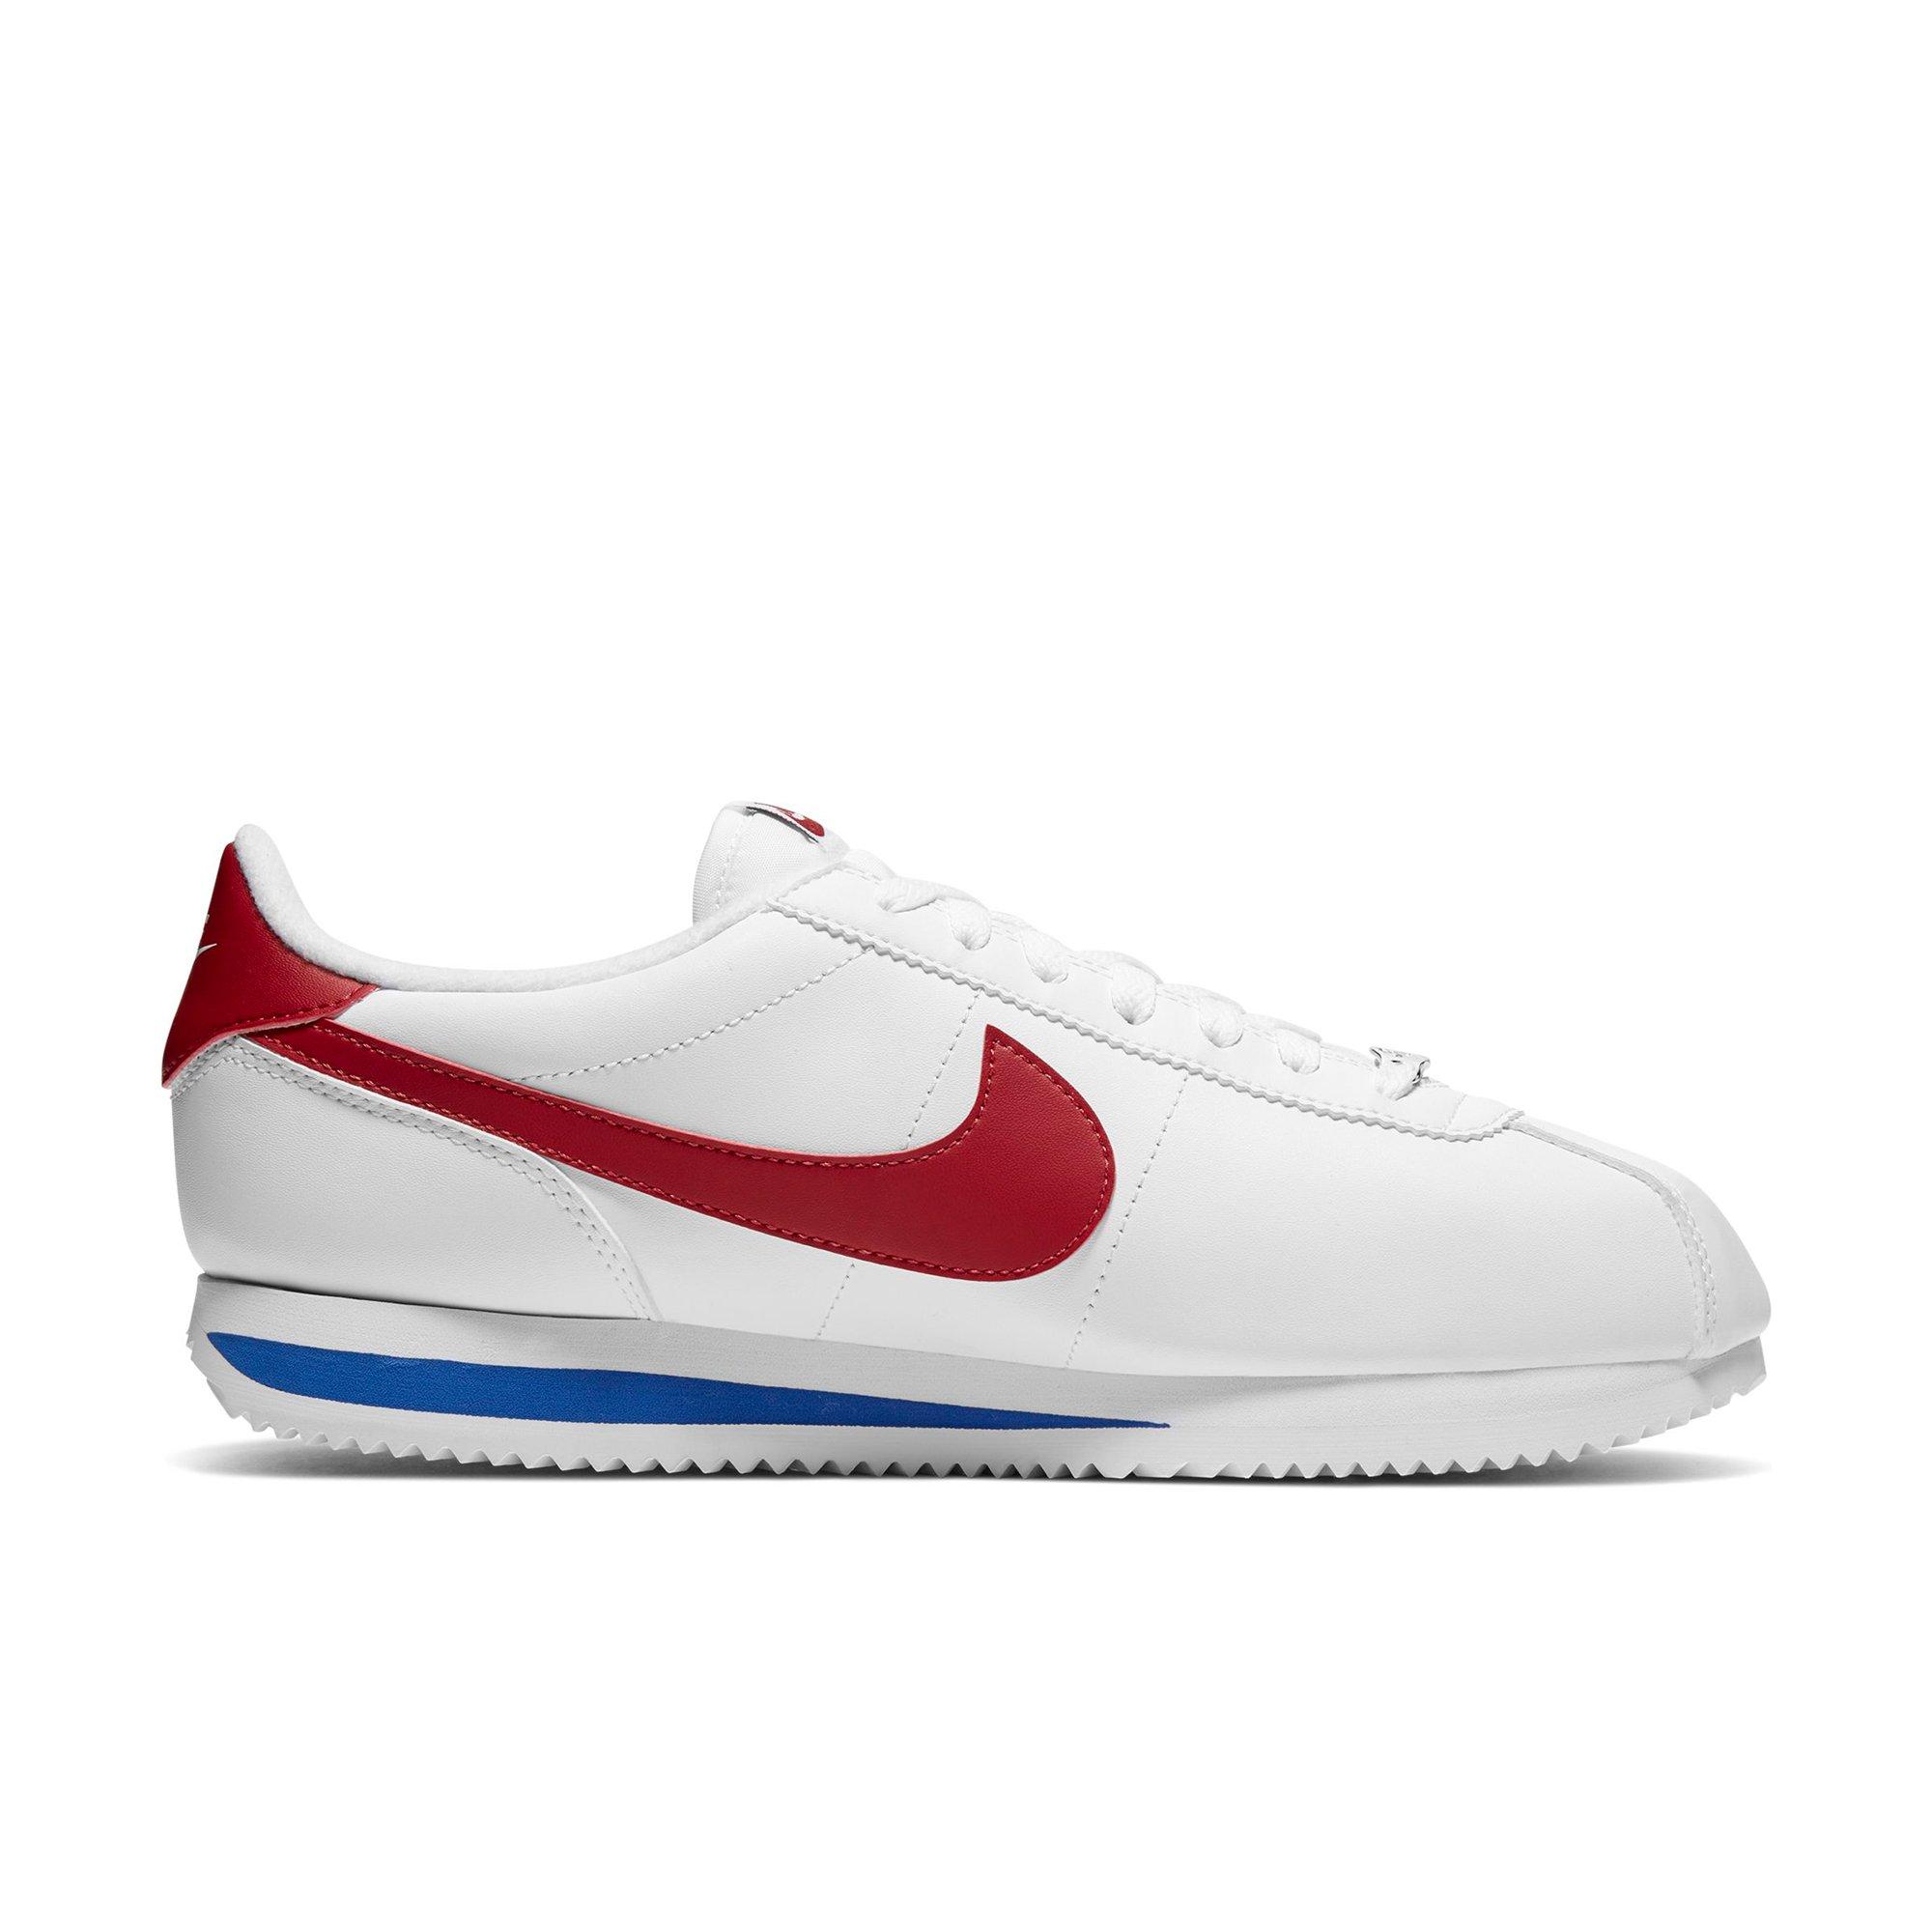 red nike cortez shoes